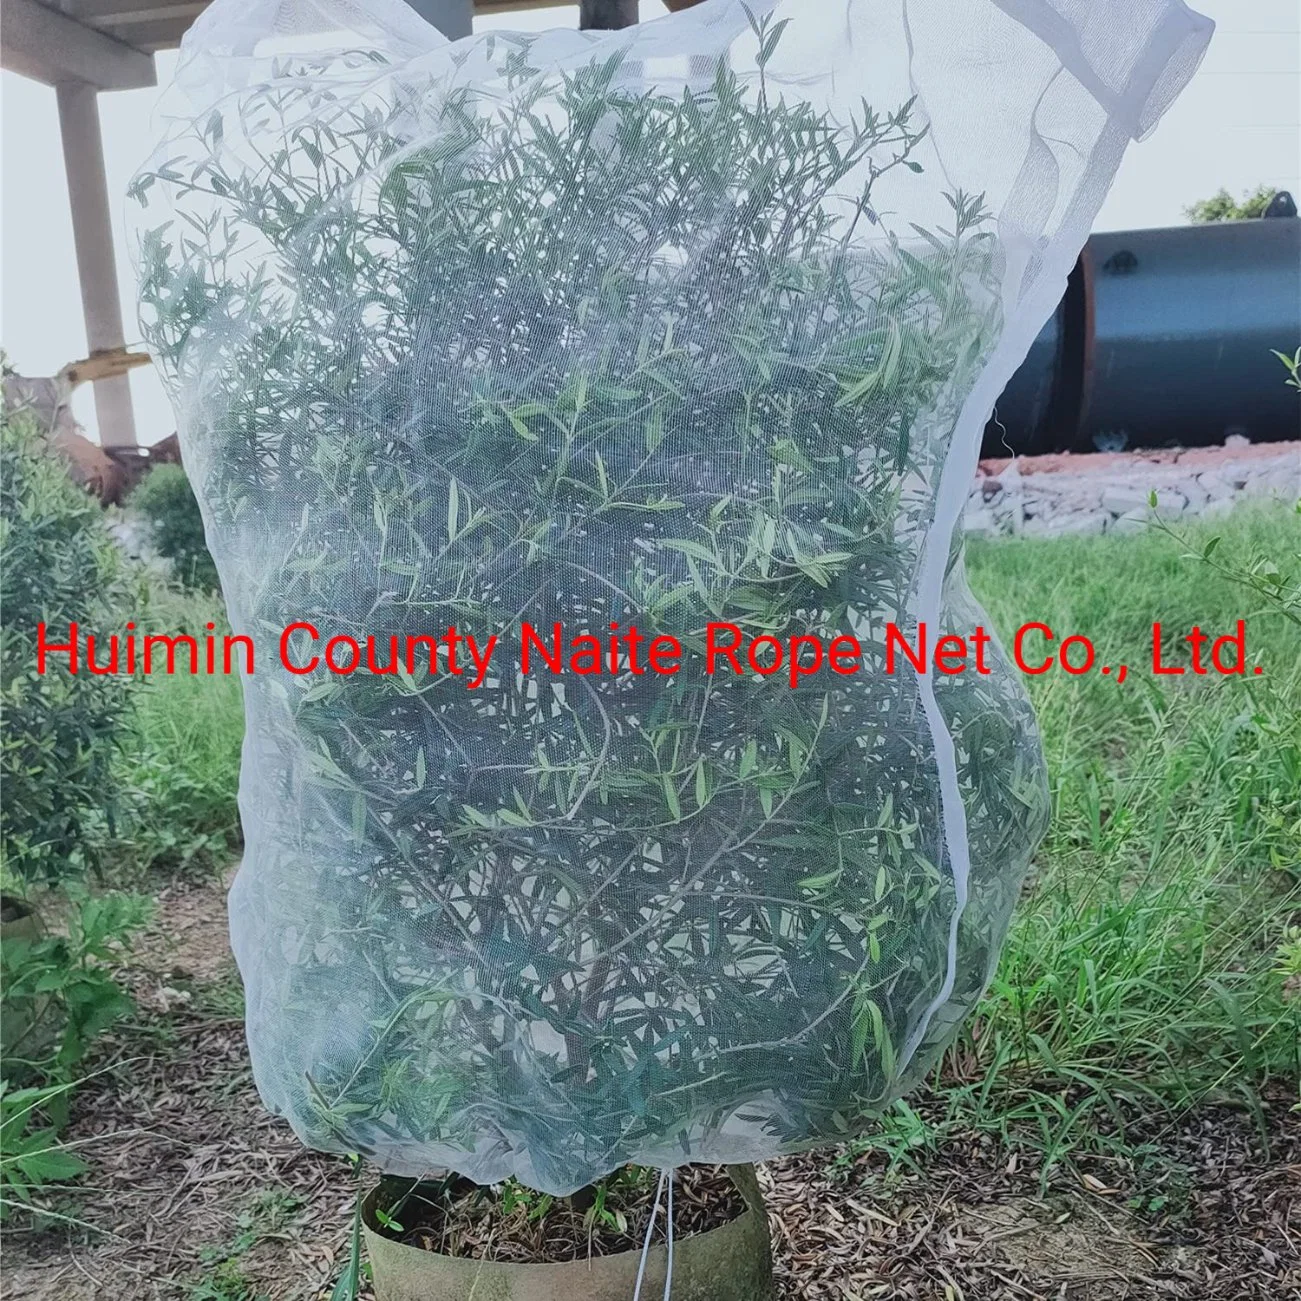 Bug Net Nettings Fine Mesh Insect Mosquito Bird Net Fence Netting for Protecting Vegetables Flowers Fruits Trees Plants